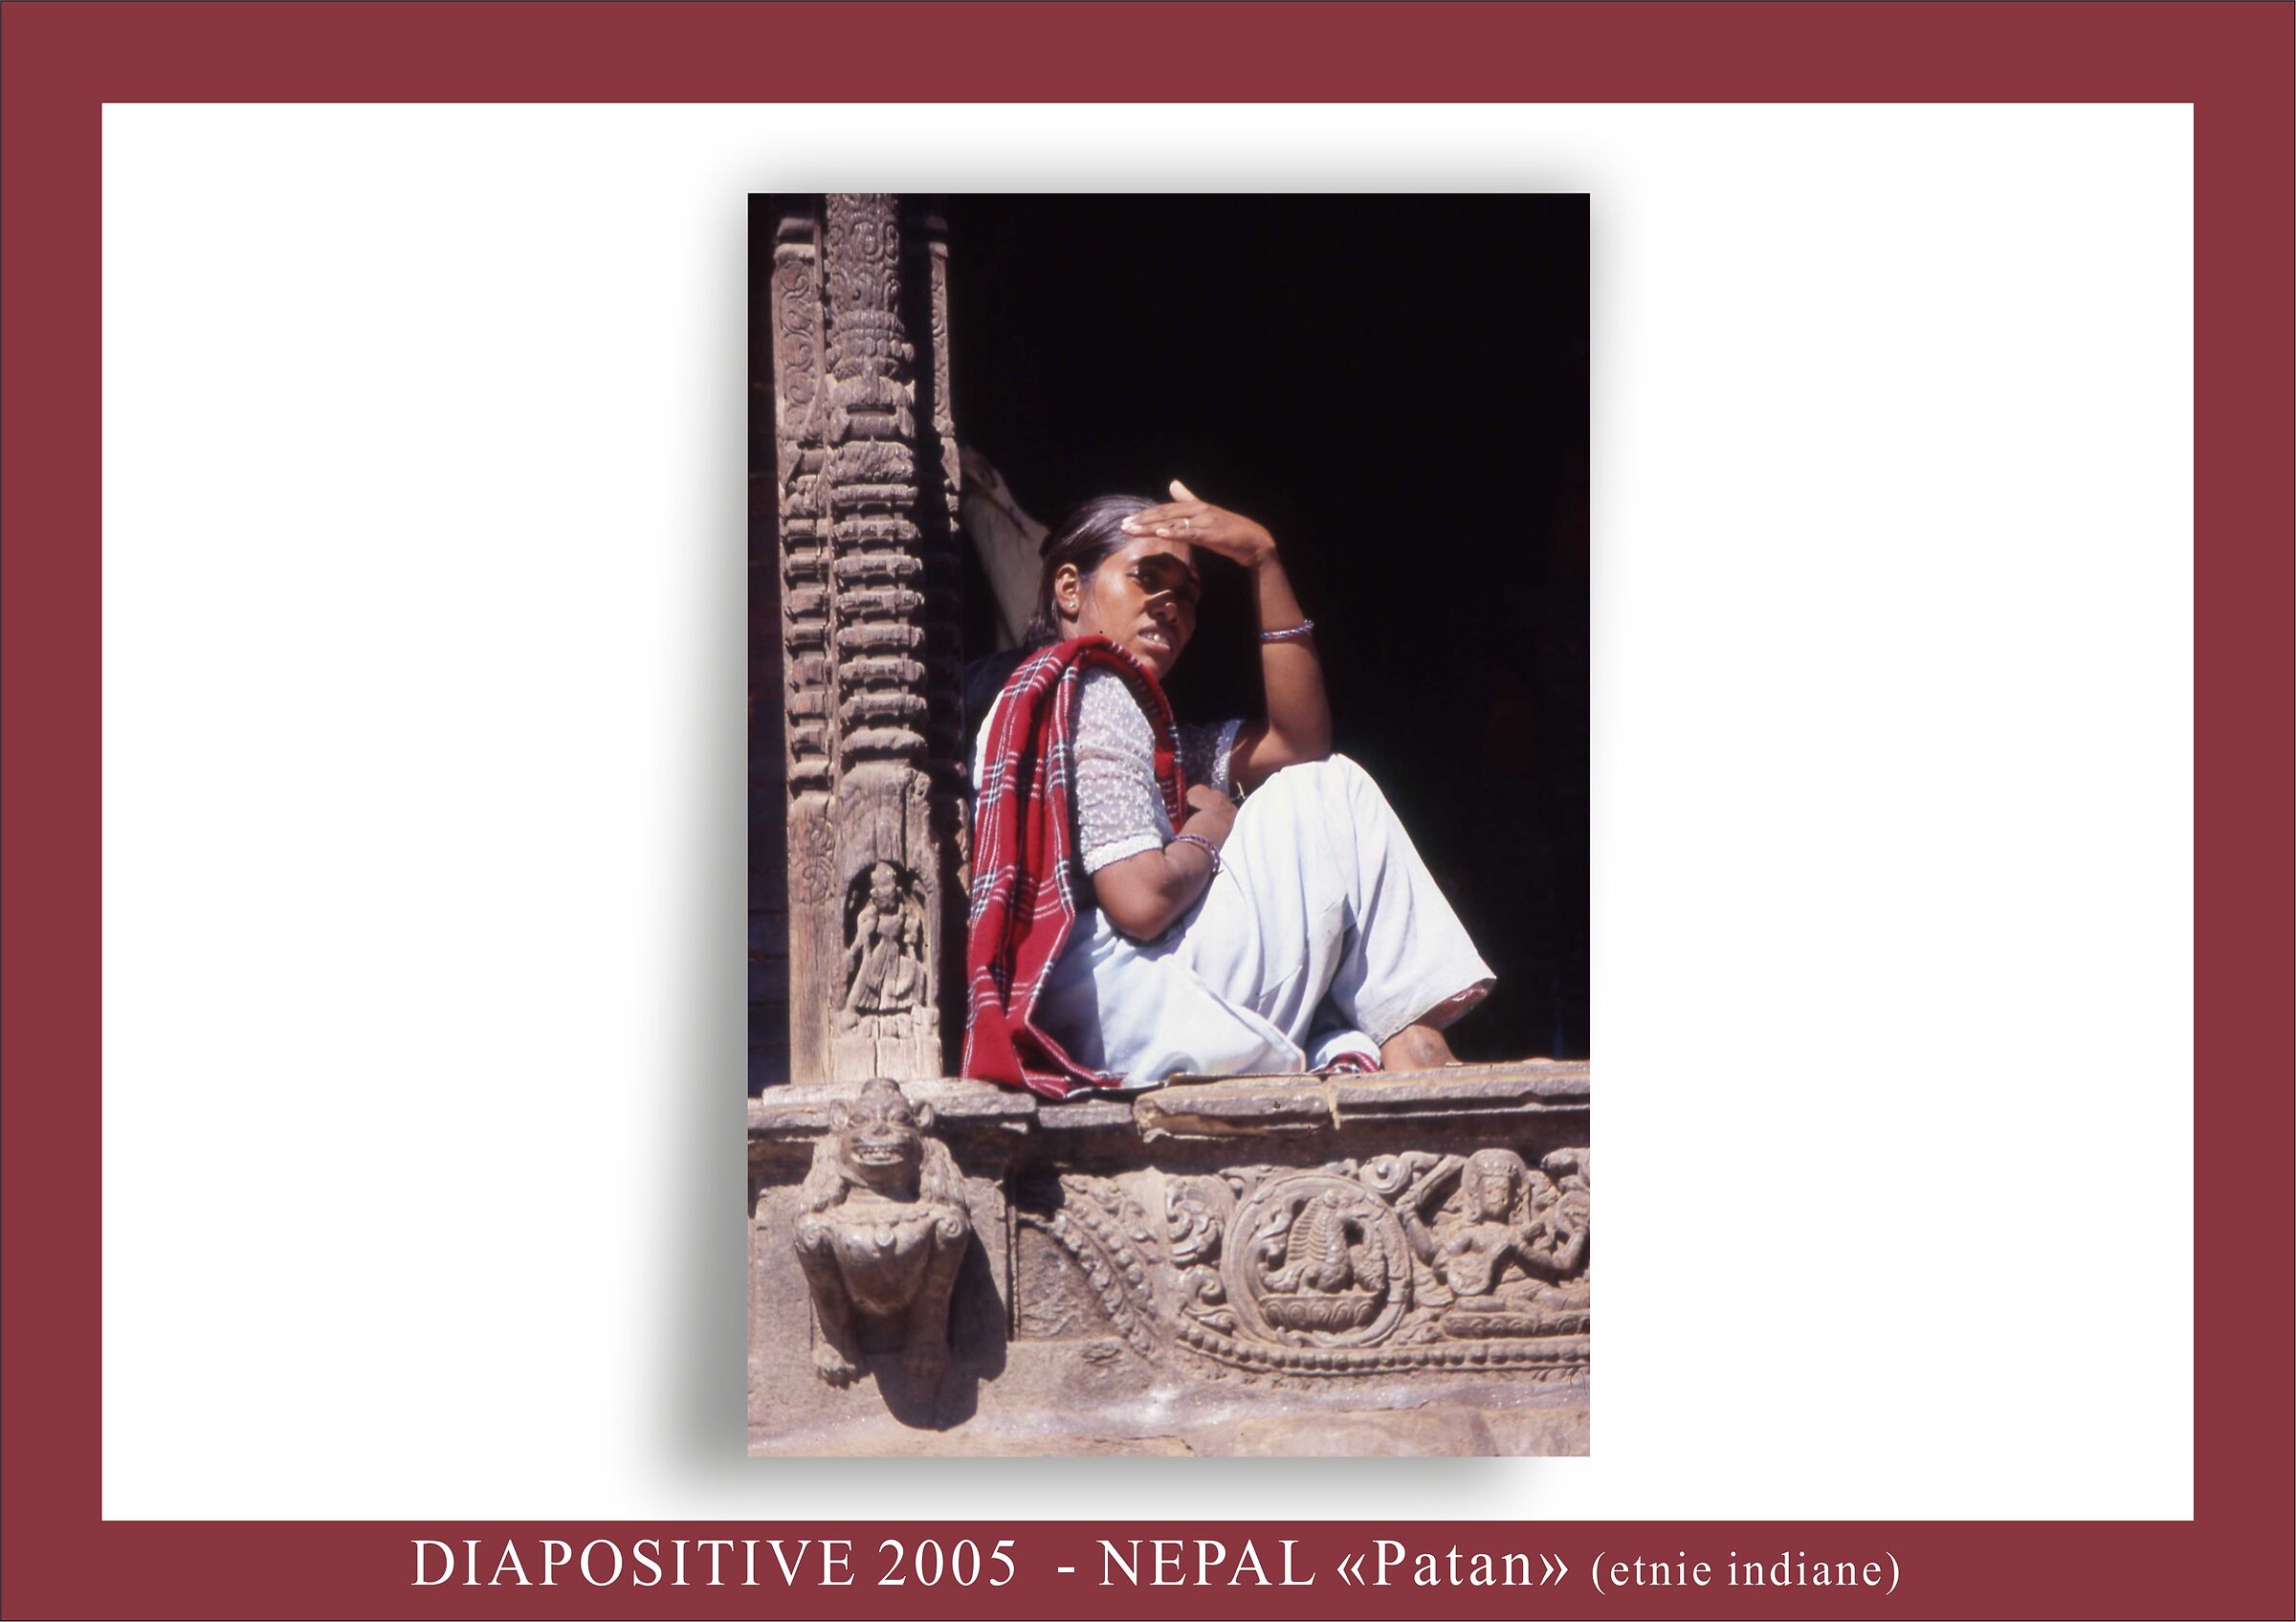 aspects of life in Patan...